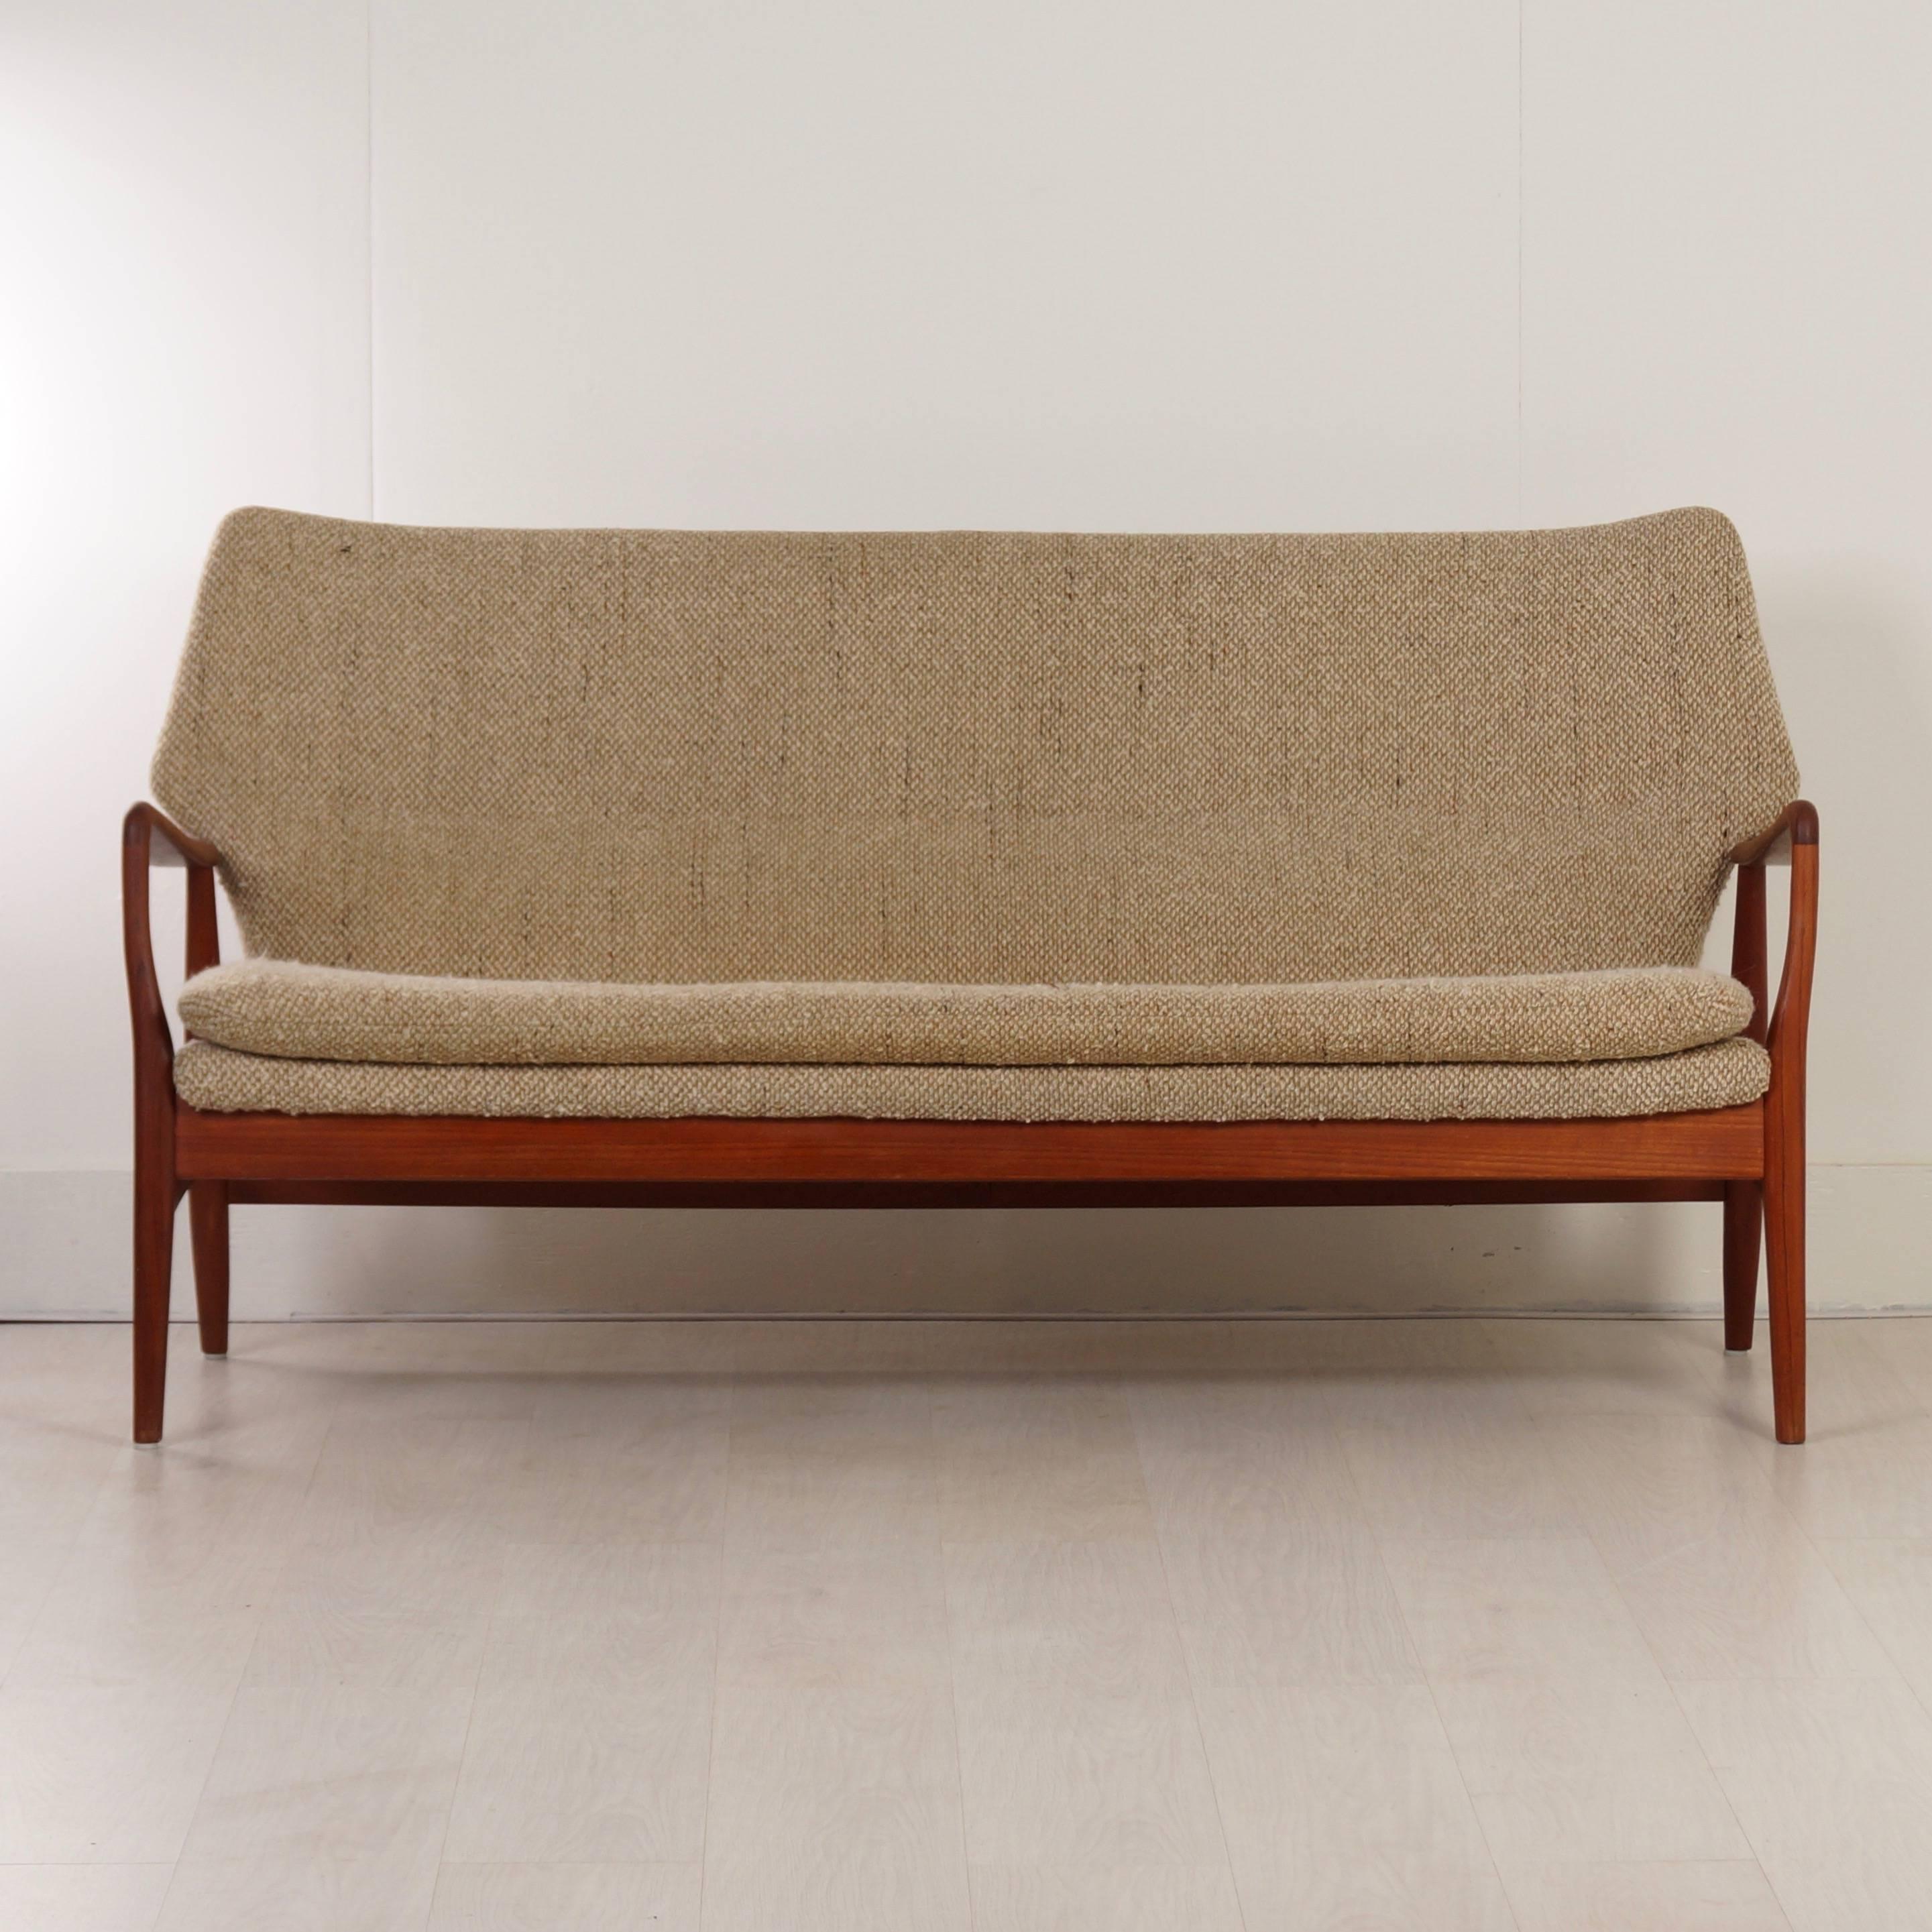 Rare living room set designed by Aksel Bender Madsen for the Dutch furniture company Bovenkamp, 1960s. Three-seat sofa, armchair gentlemen and ladies armchair. It is a model with very fine and beautifully made teak armrests (see photos). The